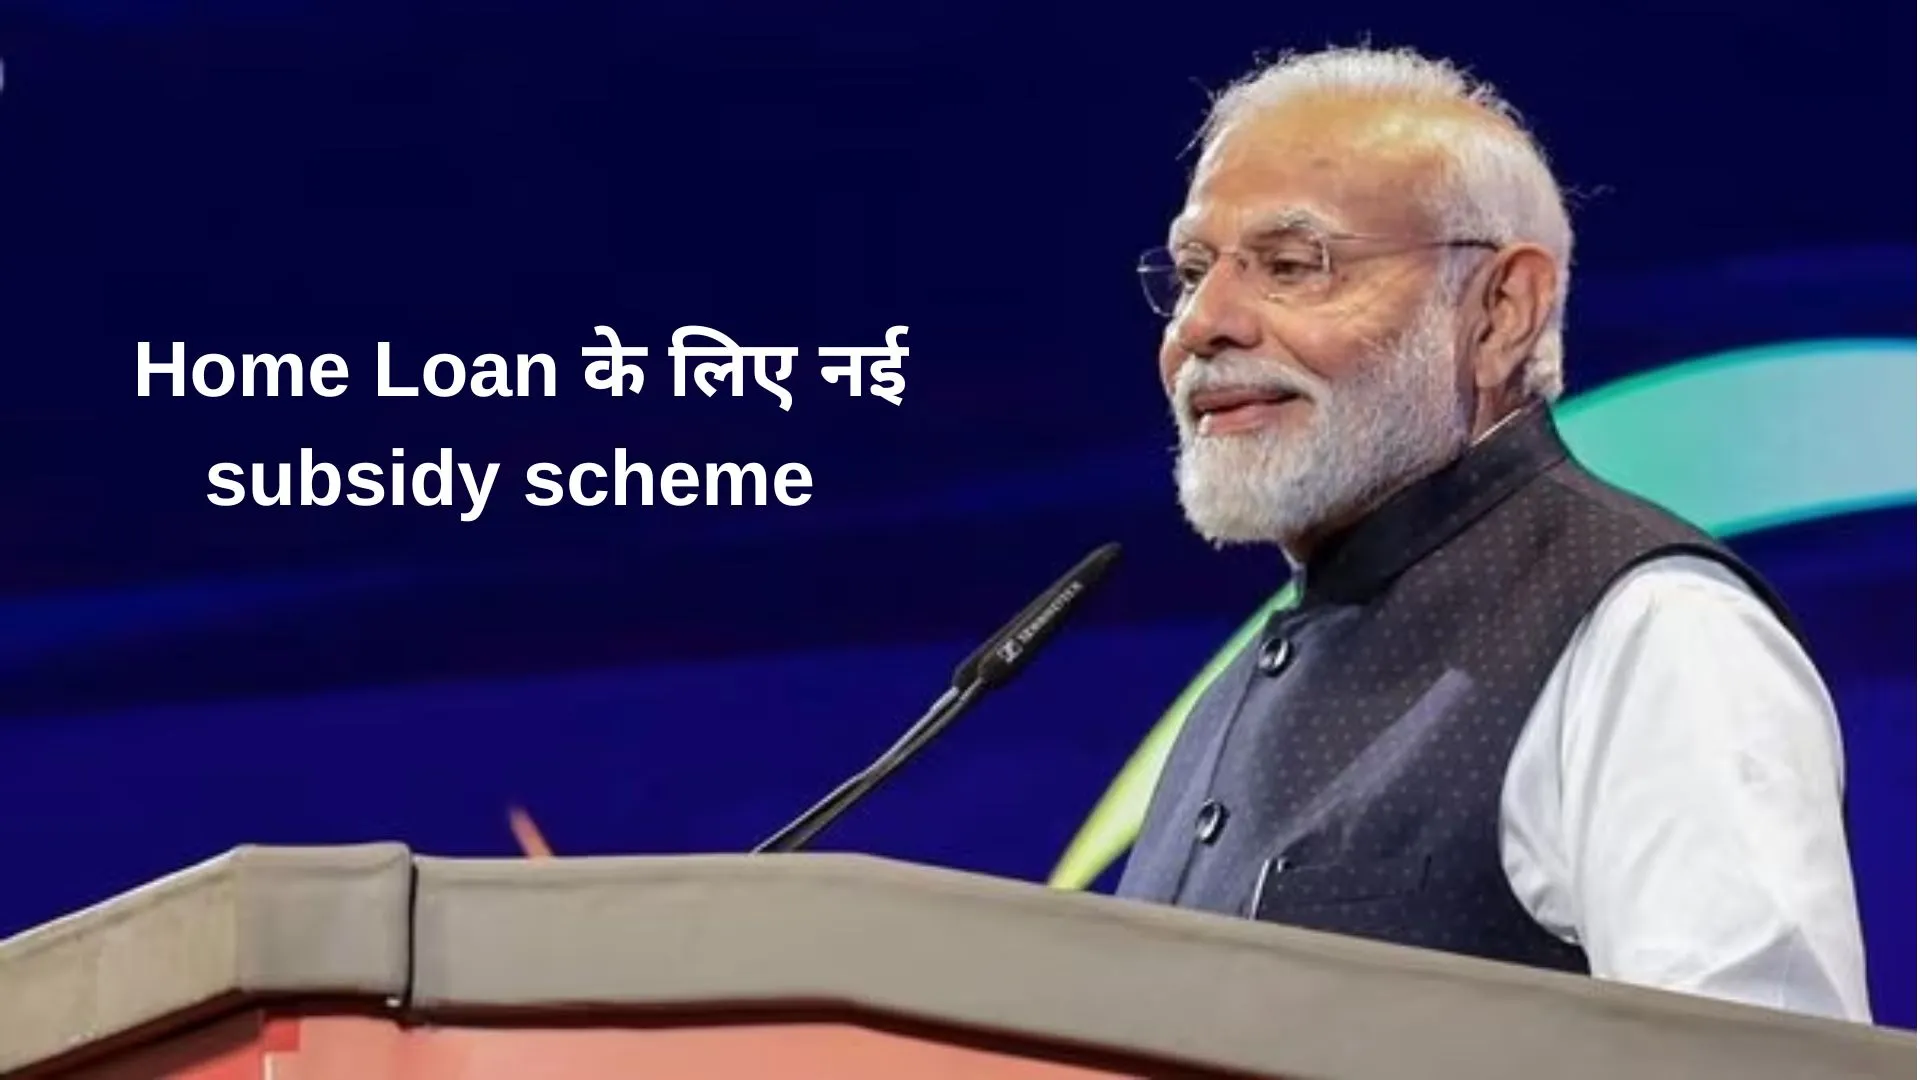 Govt launches New Home Loan Interest Subsidy Scheme, Check who are